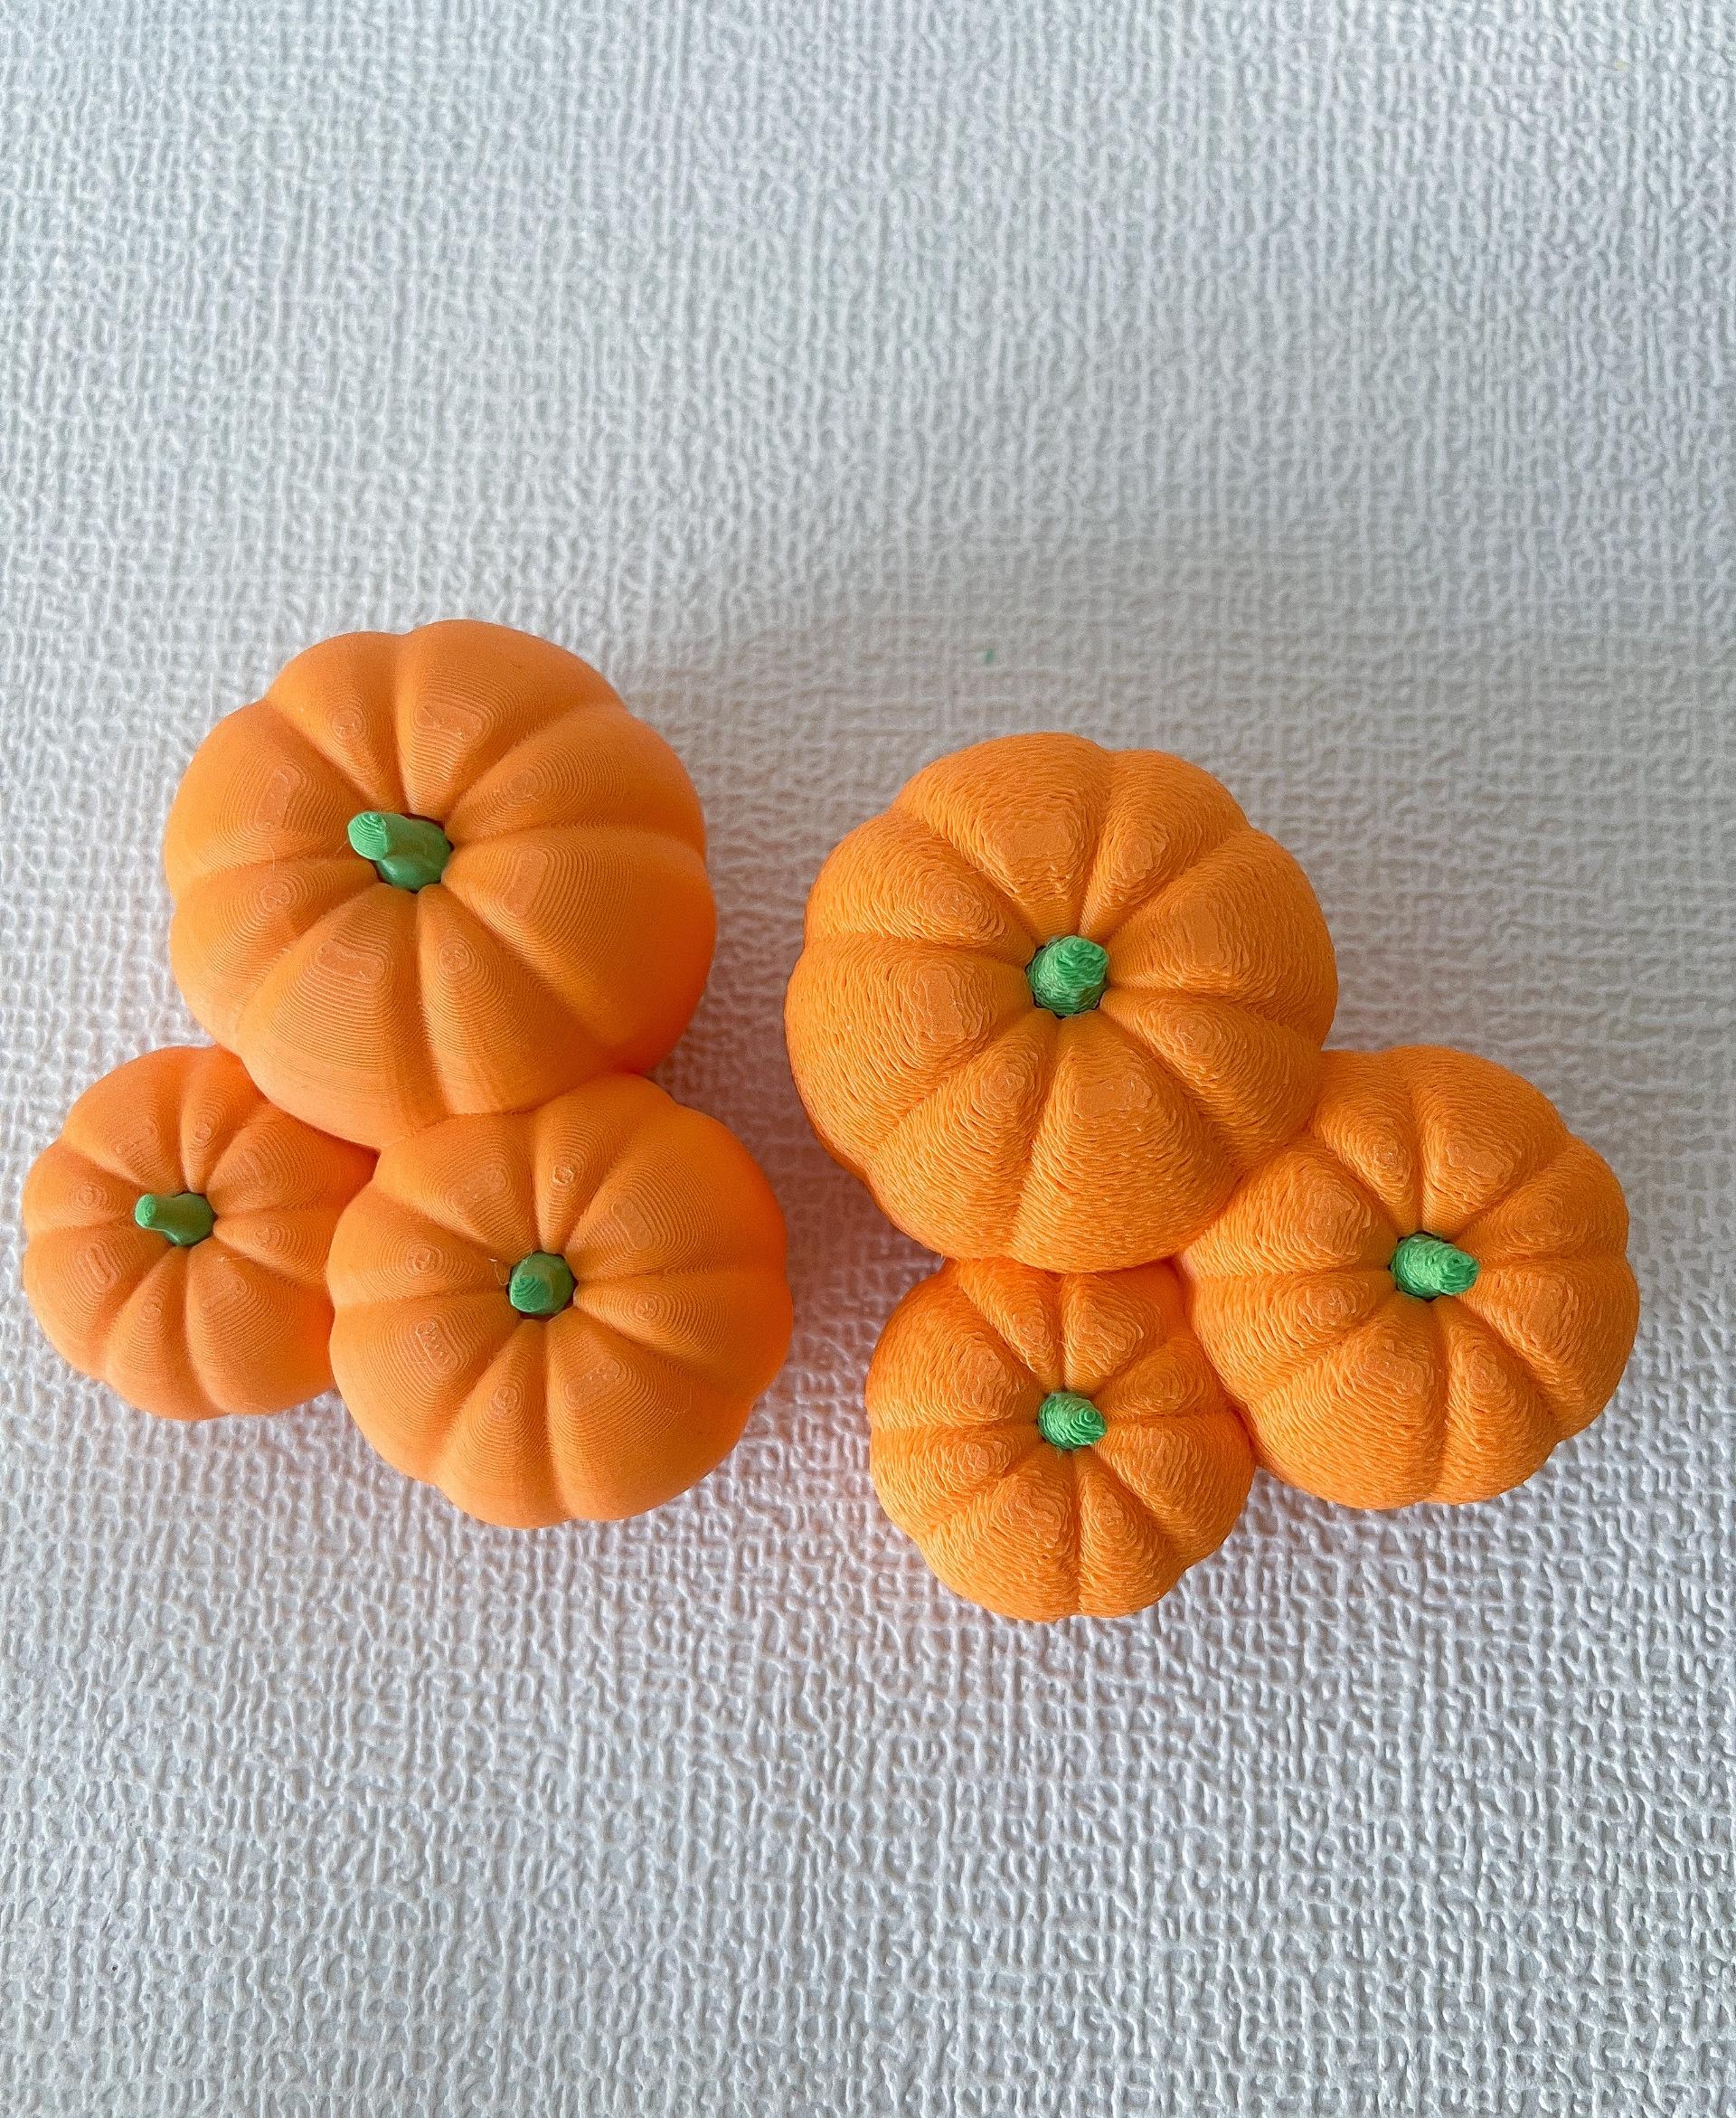 Group of Pumpkins - Left printed normal, and right one printed in FUZZY skin.
Polymaker filament - 3d model